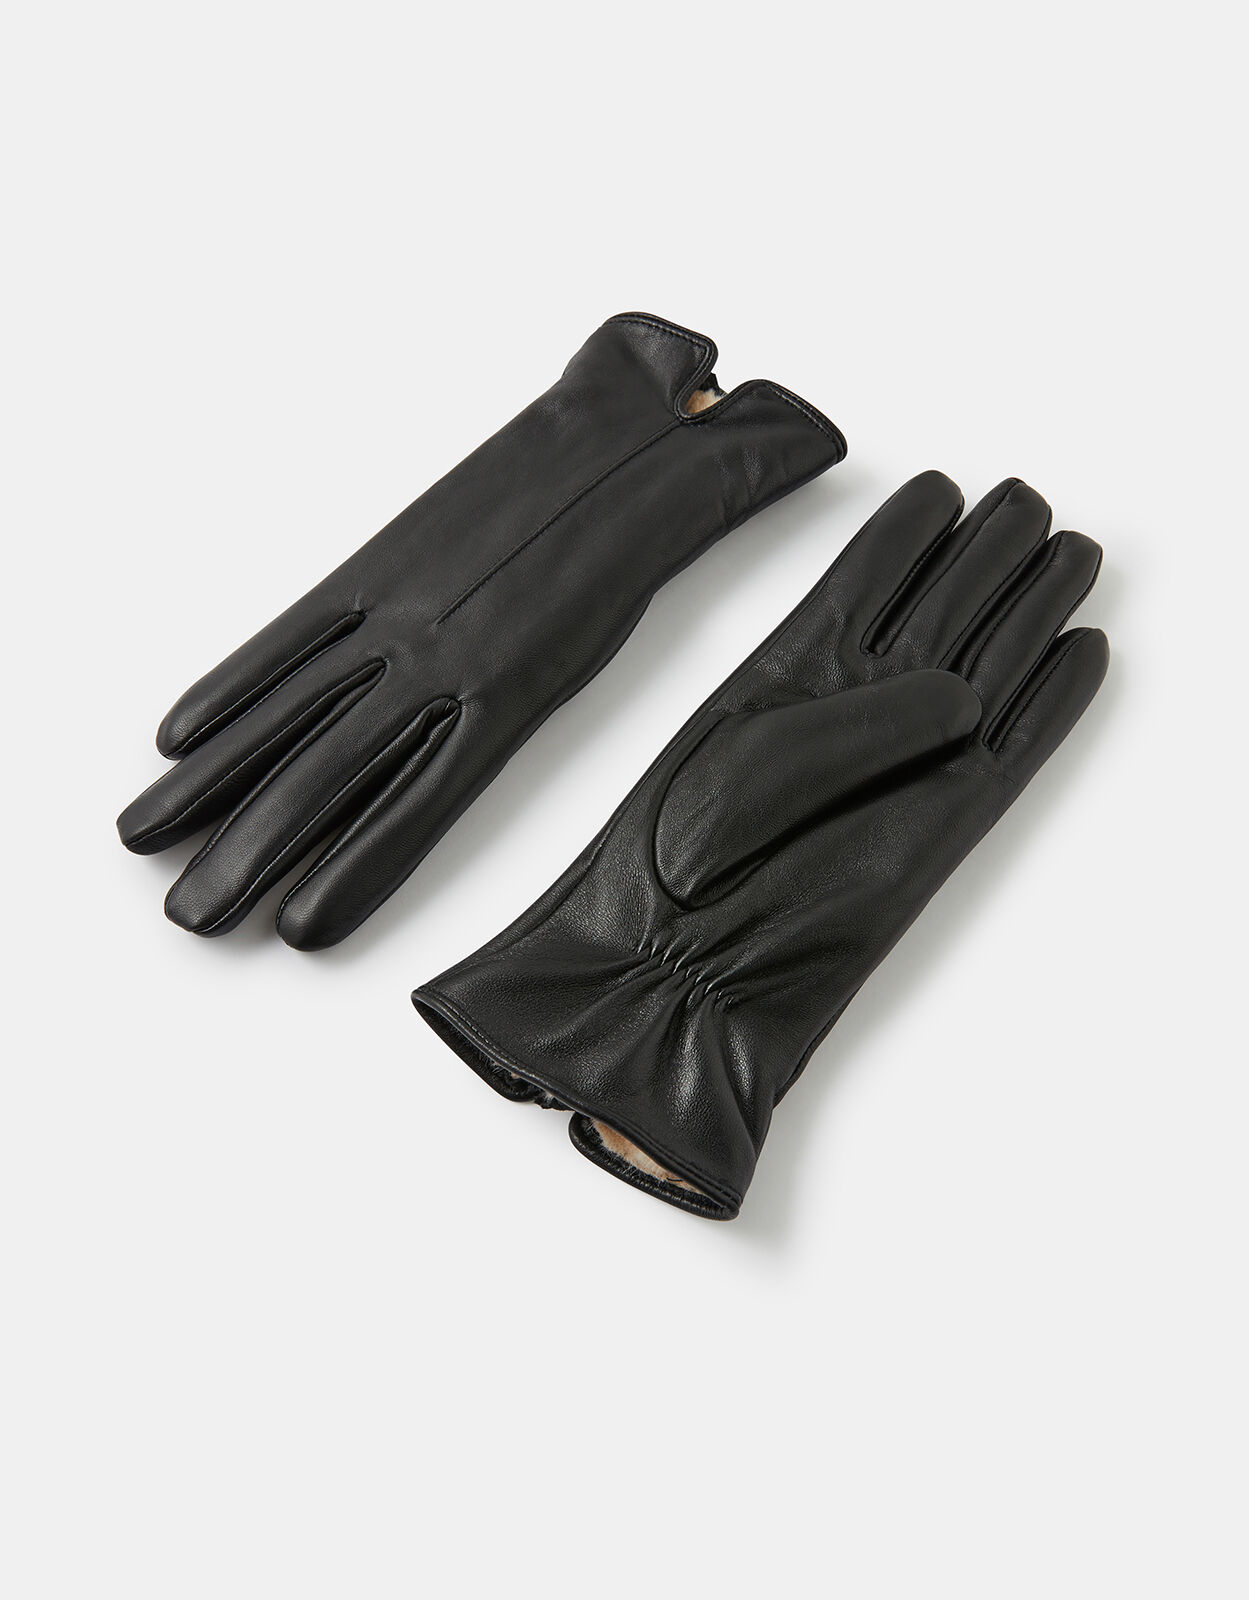 size 6 1/2 gloves made in Italy gloves womens black mid arm gloves leather gloves free shipping in Canada and the United States Accessoires Handschoenen & wanten Rijhandschoenen 